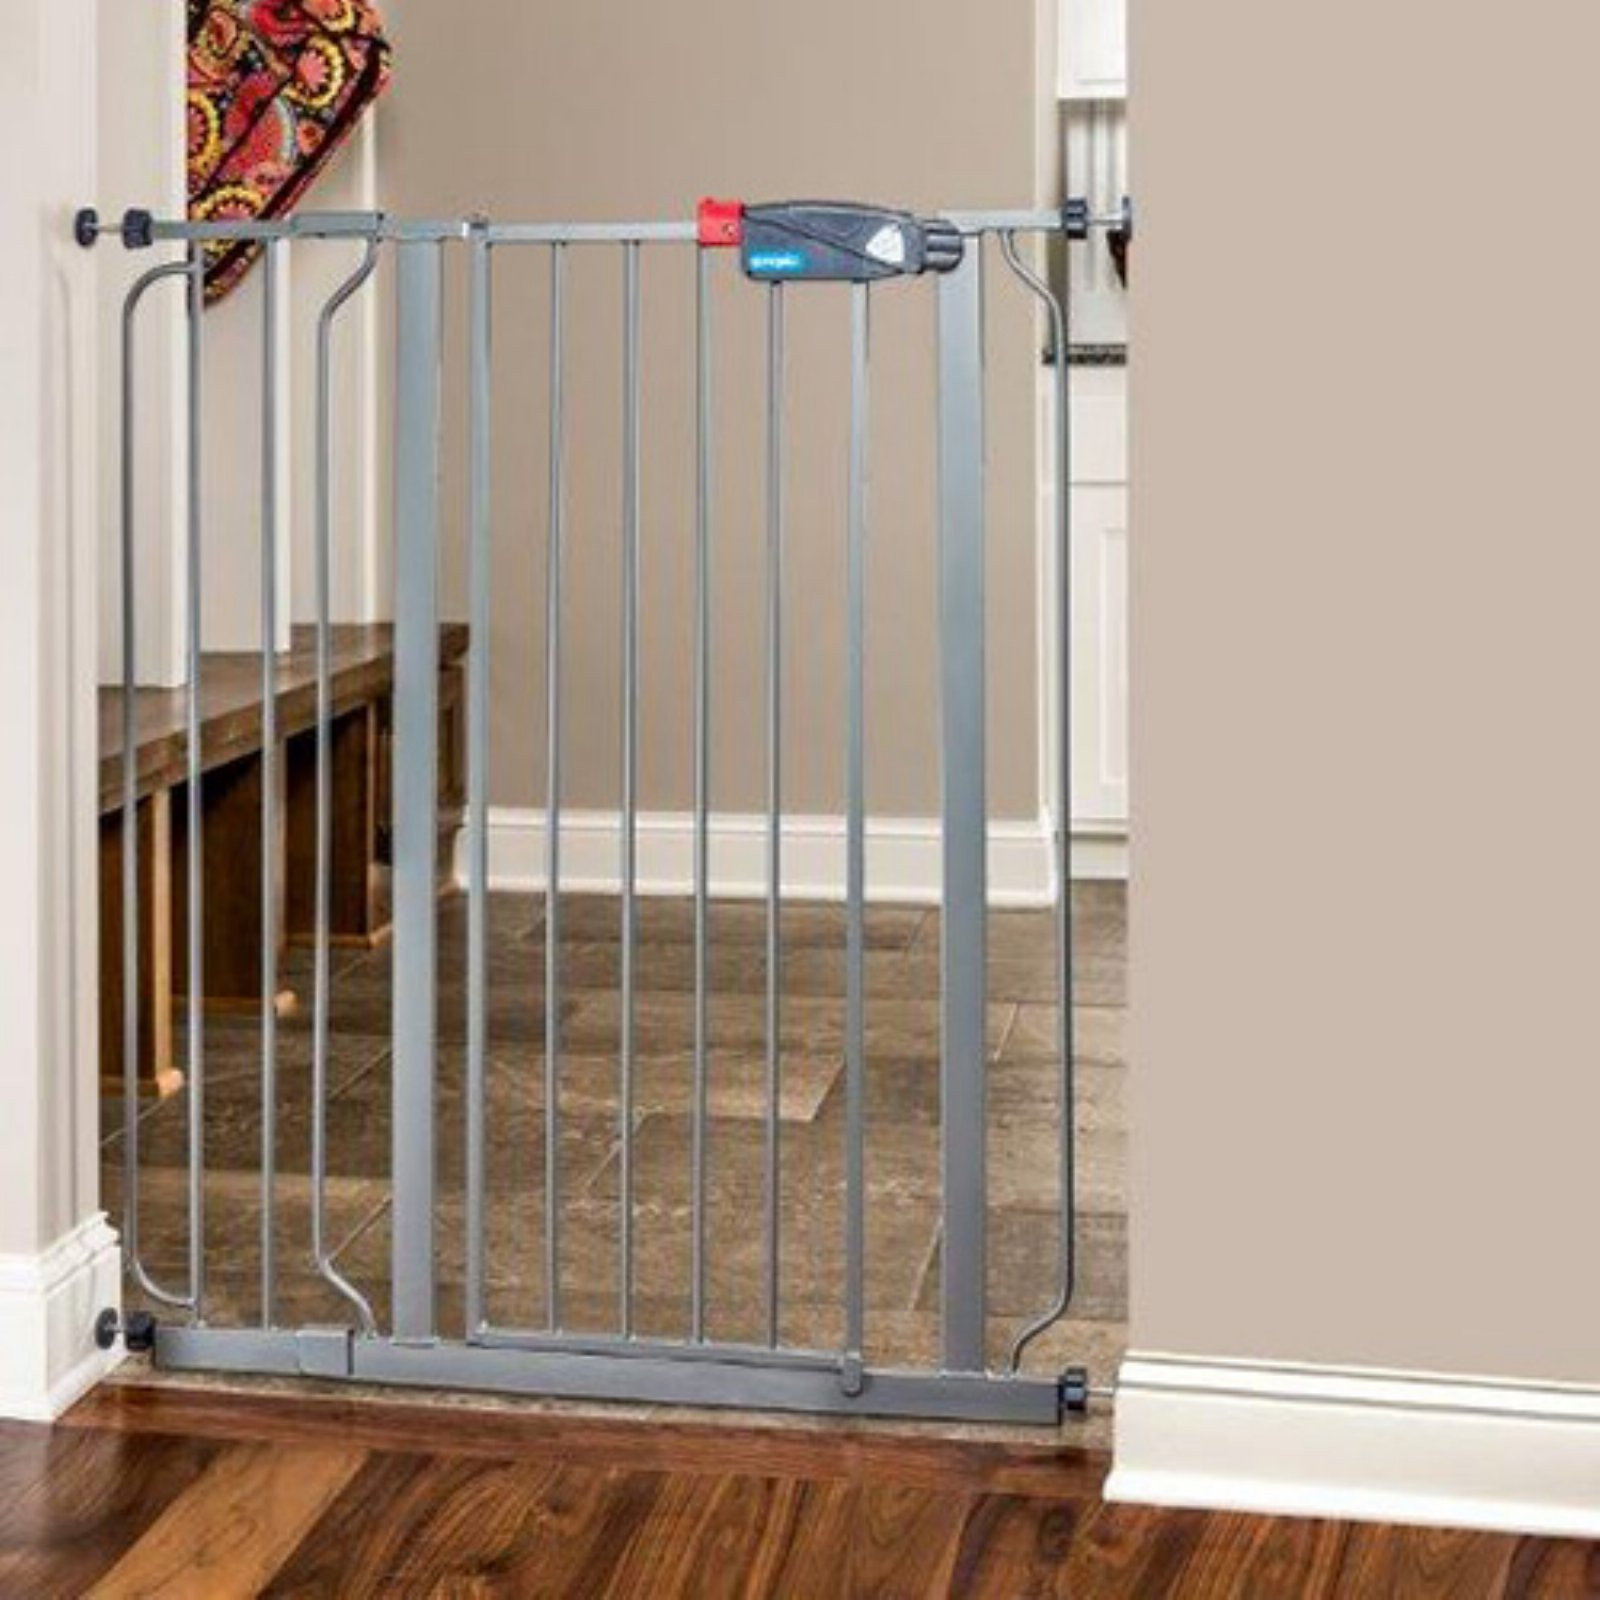 The Best Ideas for Regalo Baby Gate - Best Collections Ever | Home